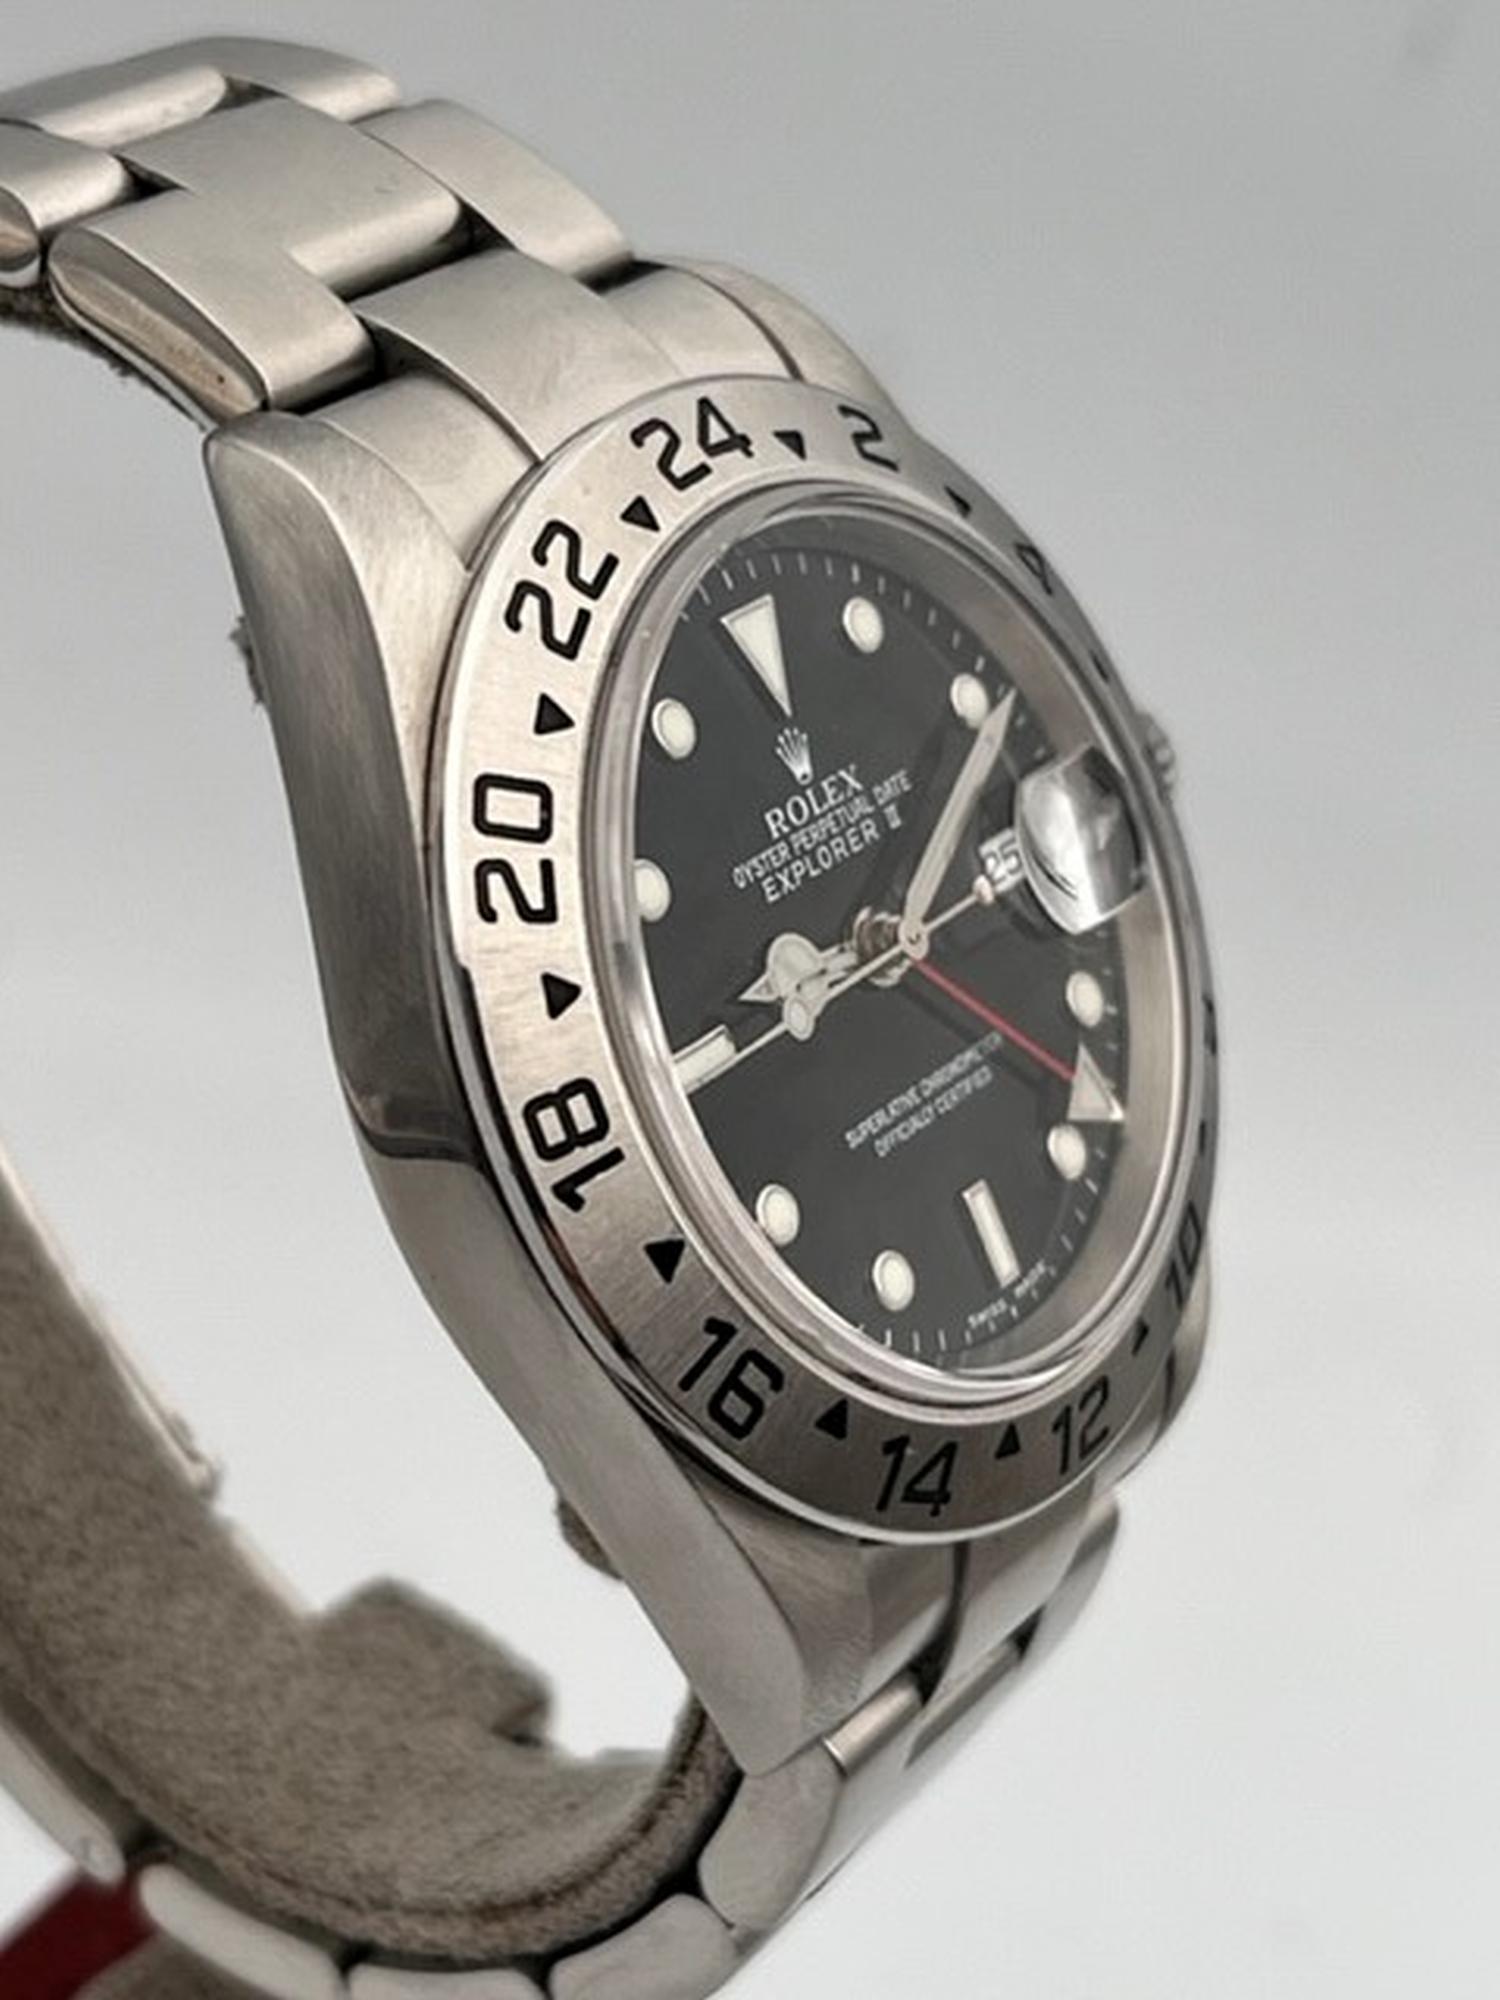 ROLEX EXPLORER 2 16750 BOX AND PAPERS 2004 - Image 4 of 7